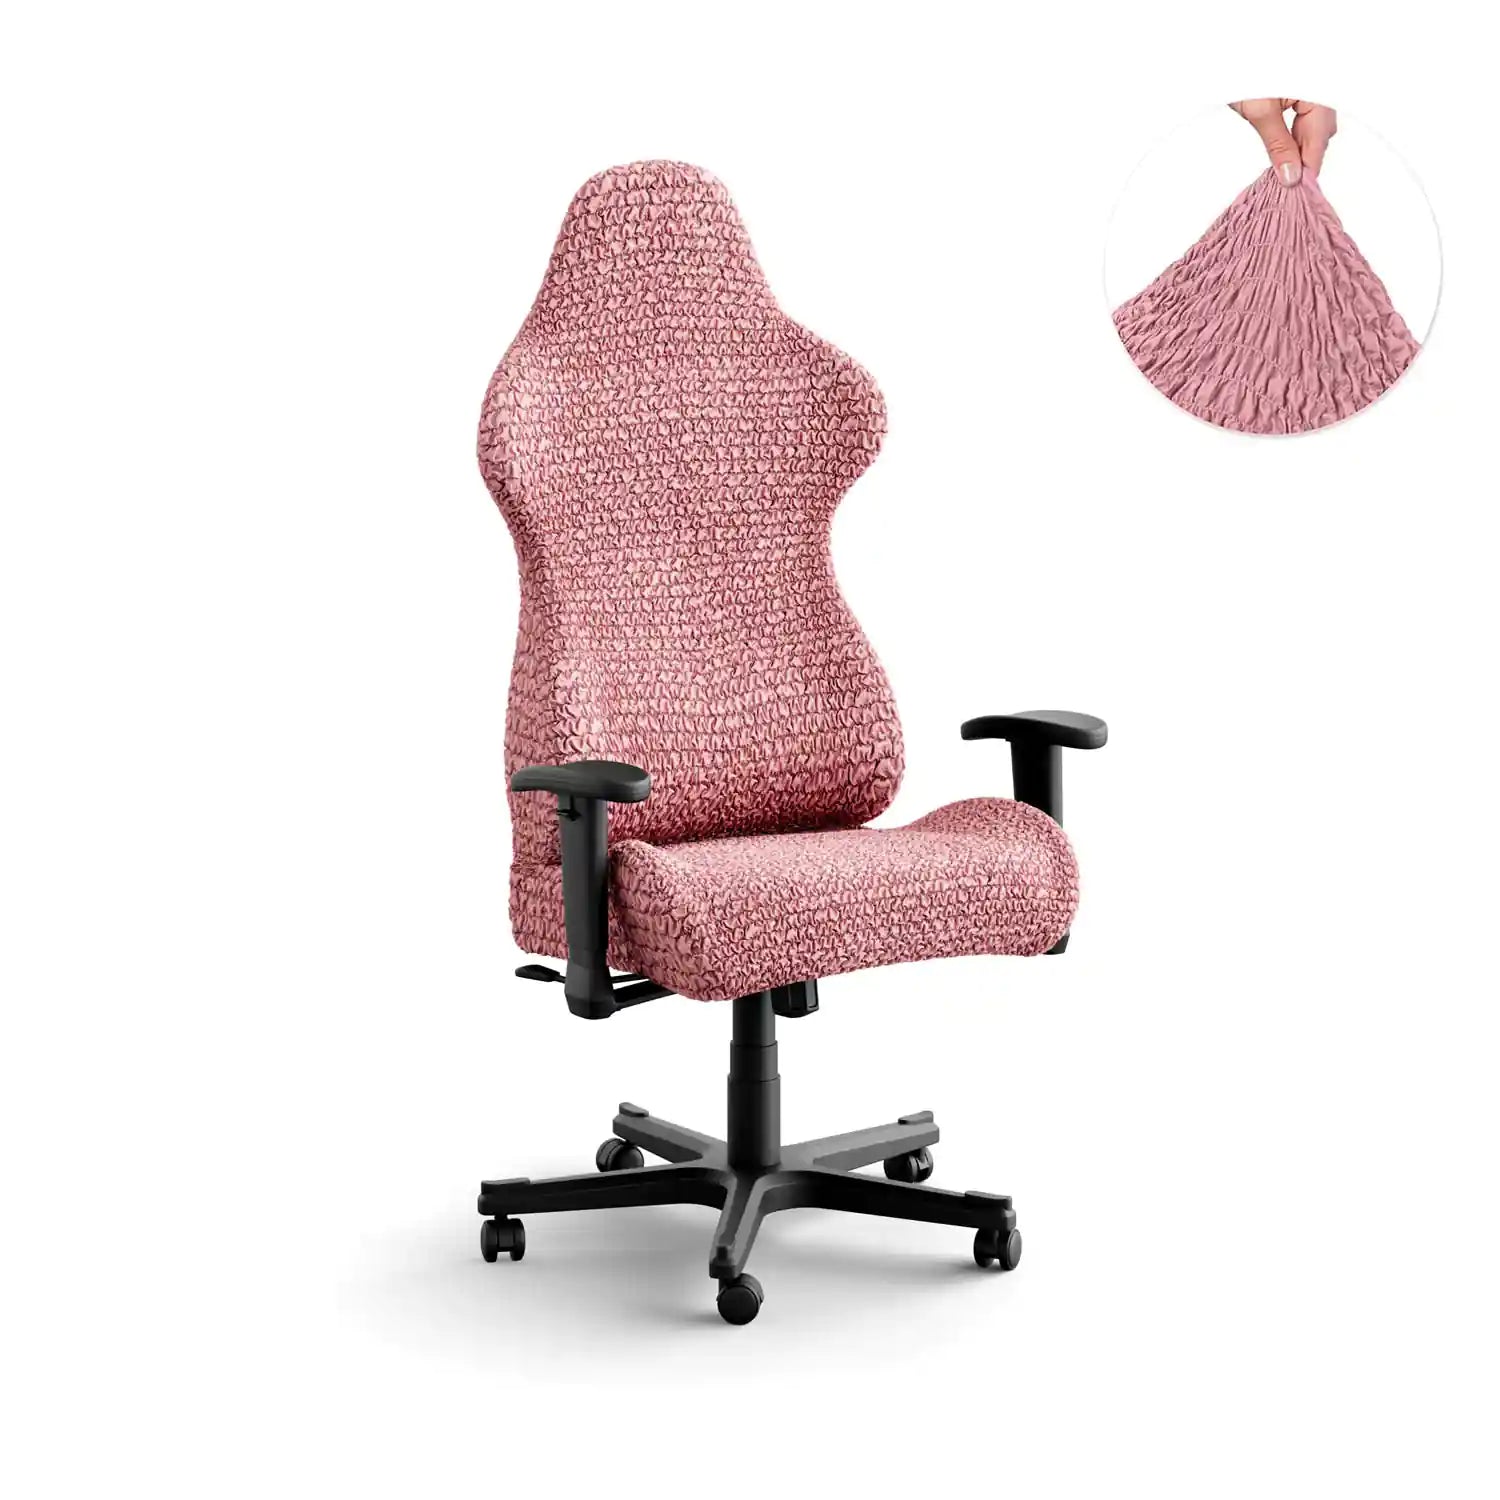 Office/ Gaming Chair Cover - Pink, Microfibra Collection